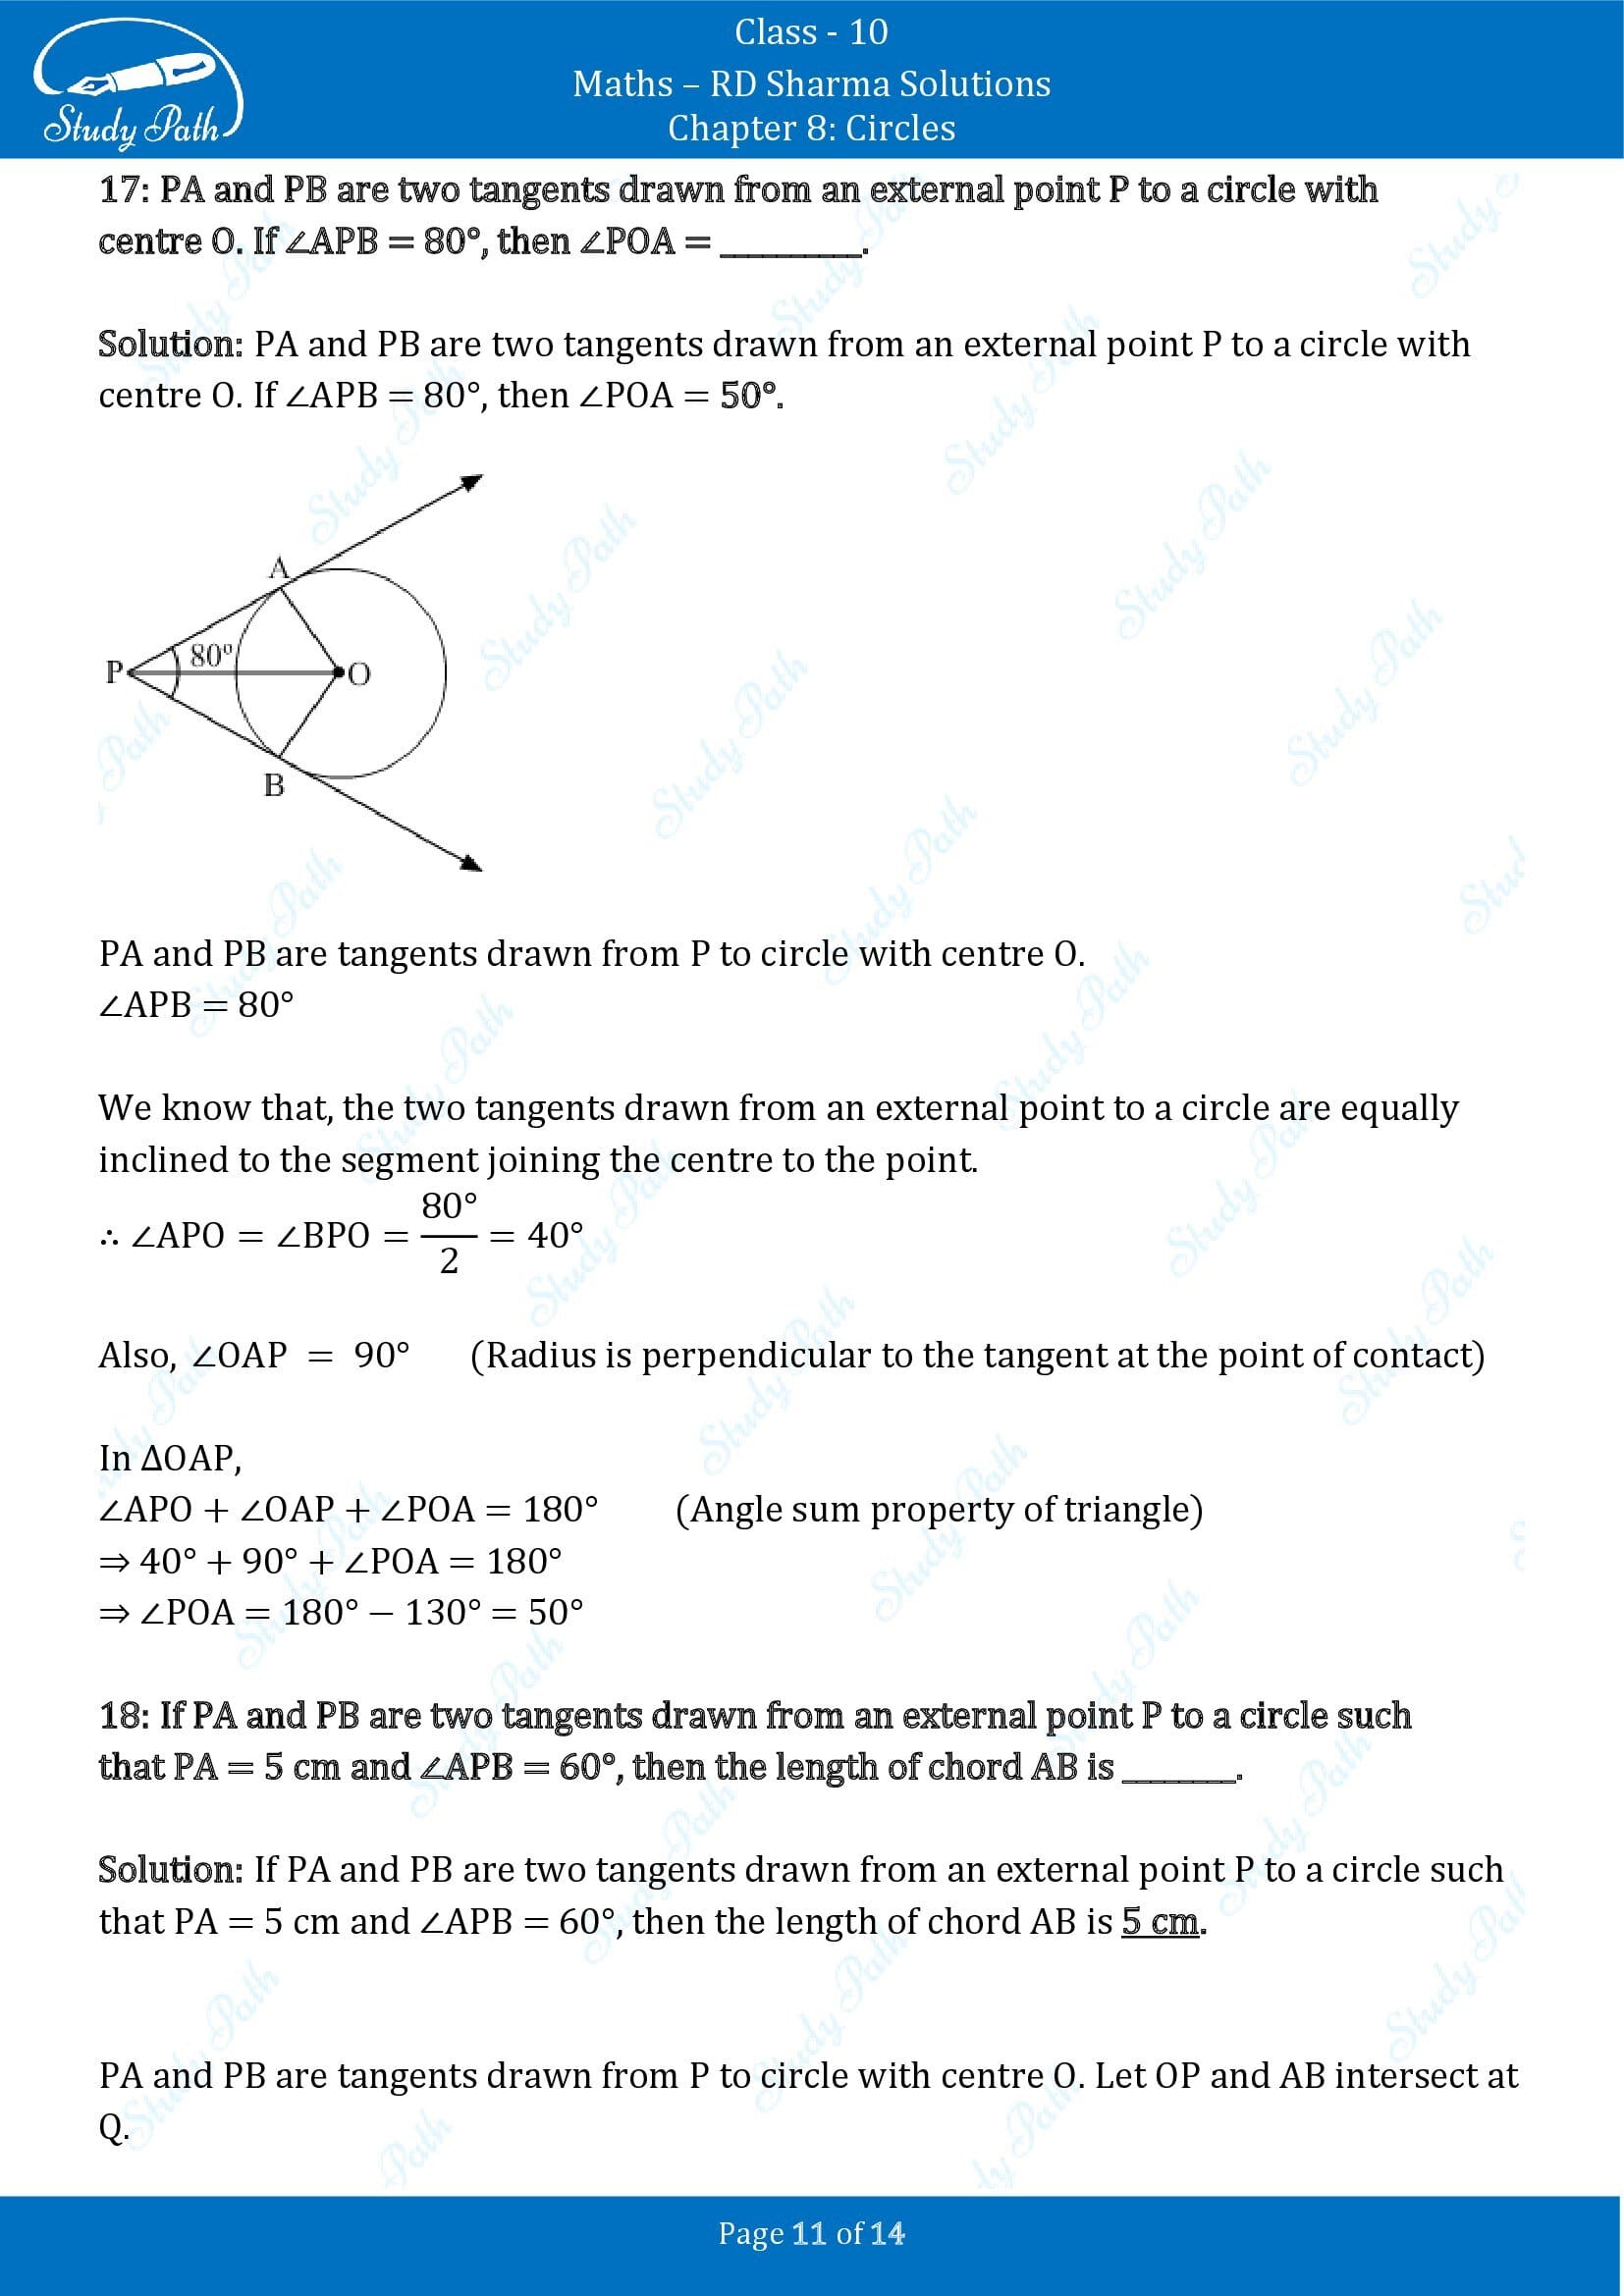 RD Sharma Solutions Class 10 Chapter 8 Circles Fill in the Blank Type Questions FBQs 00011